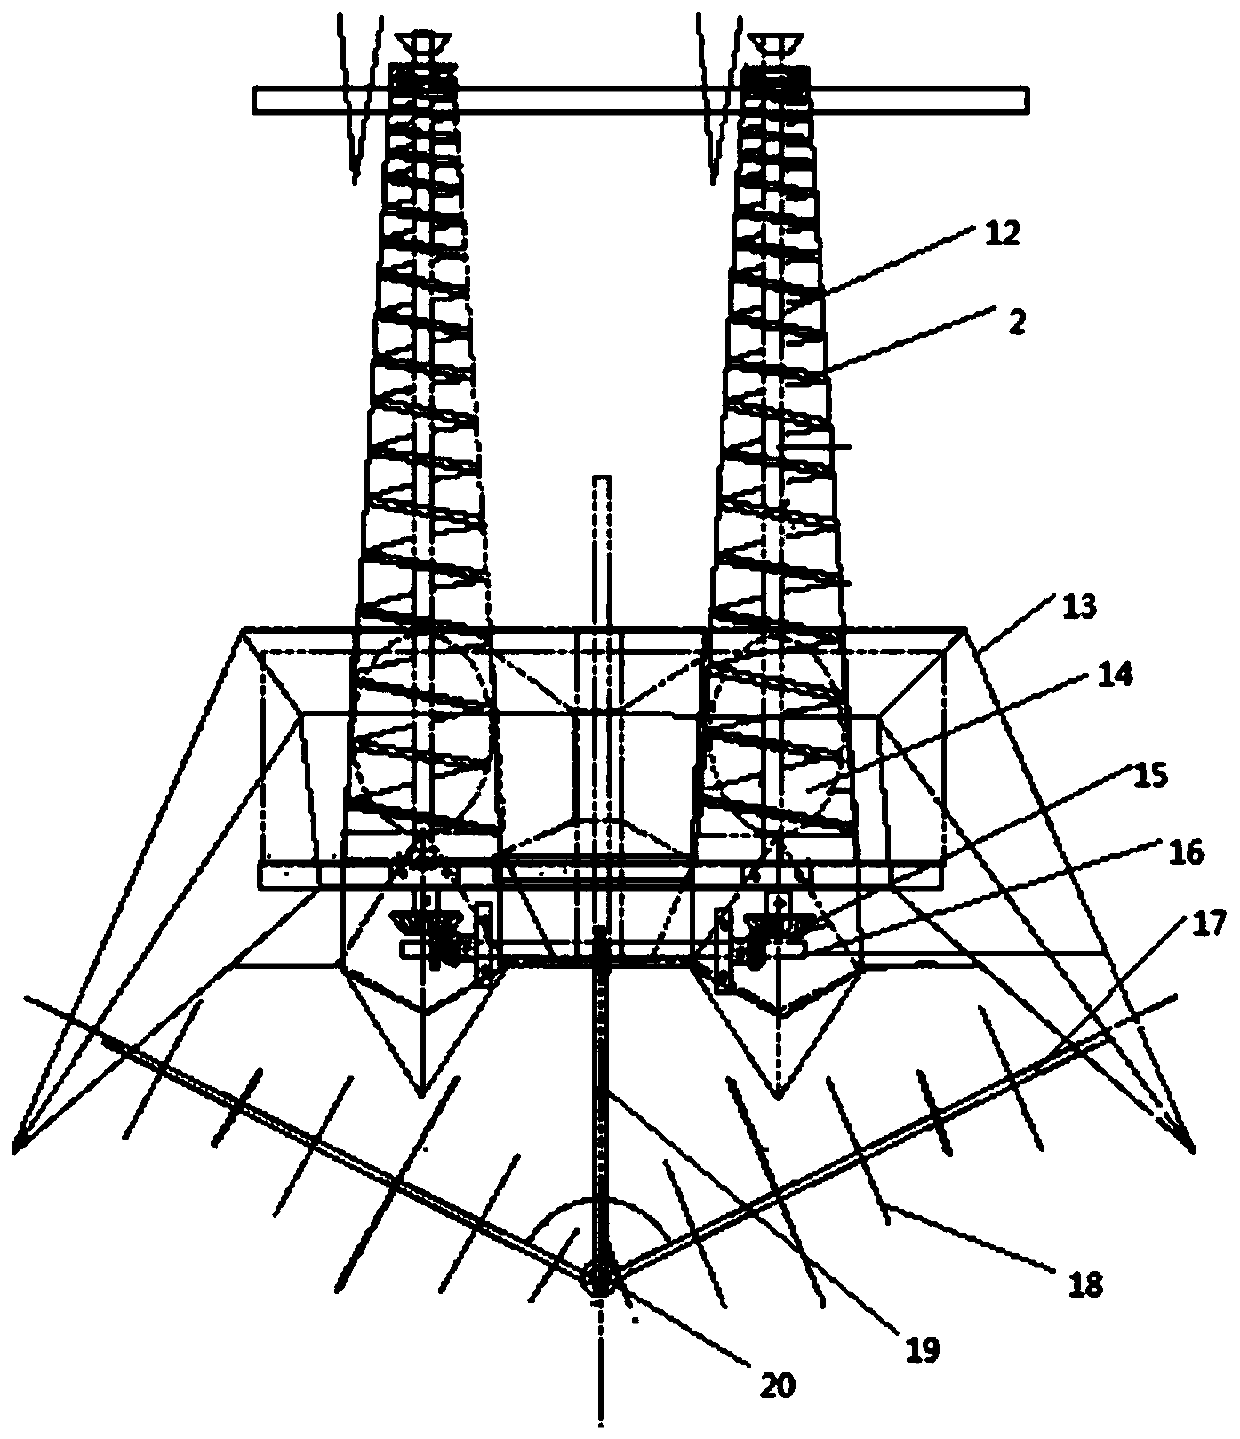 Efficient processing device of corn straw